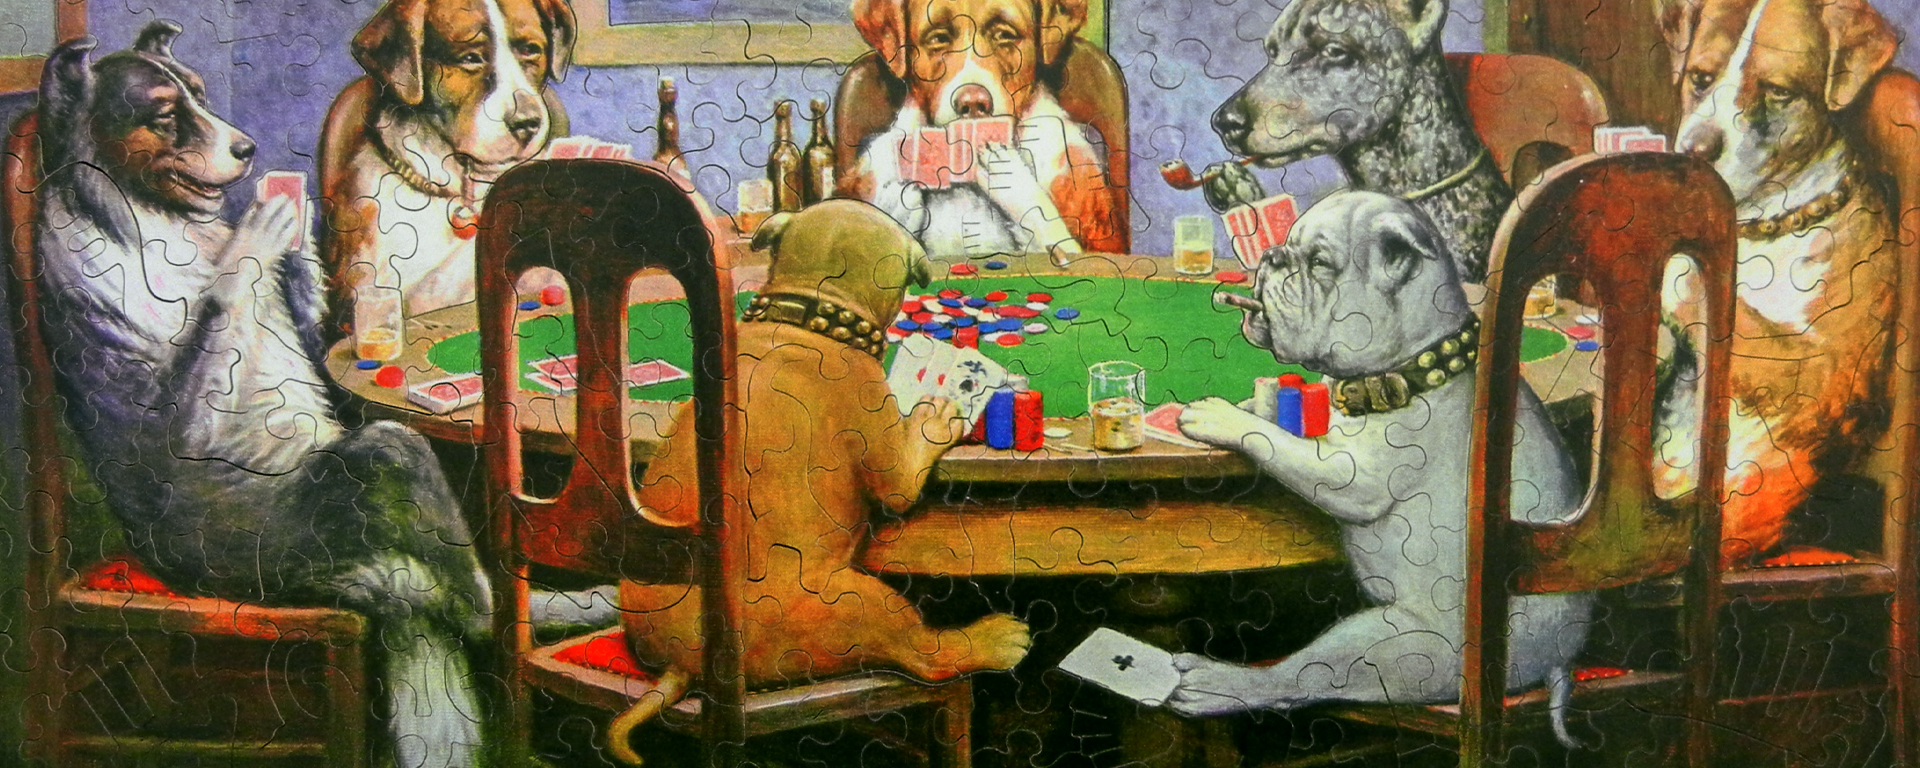 Wooden humor puzzle depicting dogs sitting around a table playing poker.